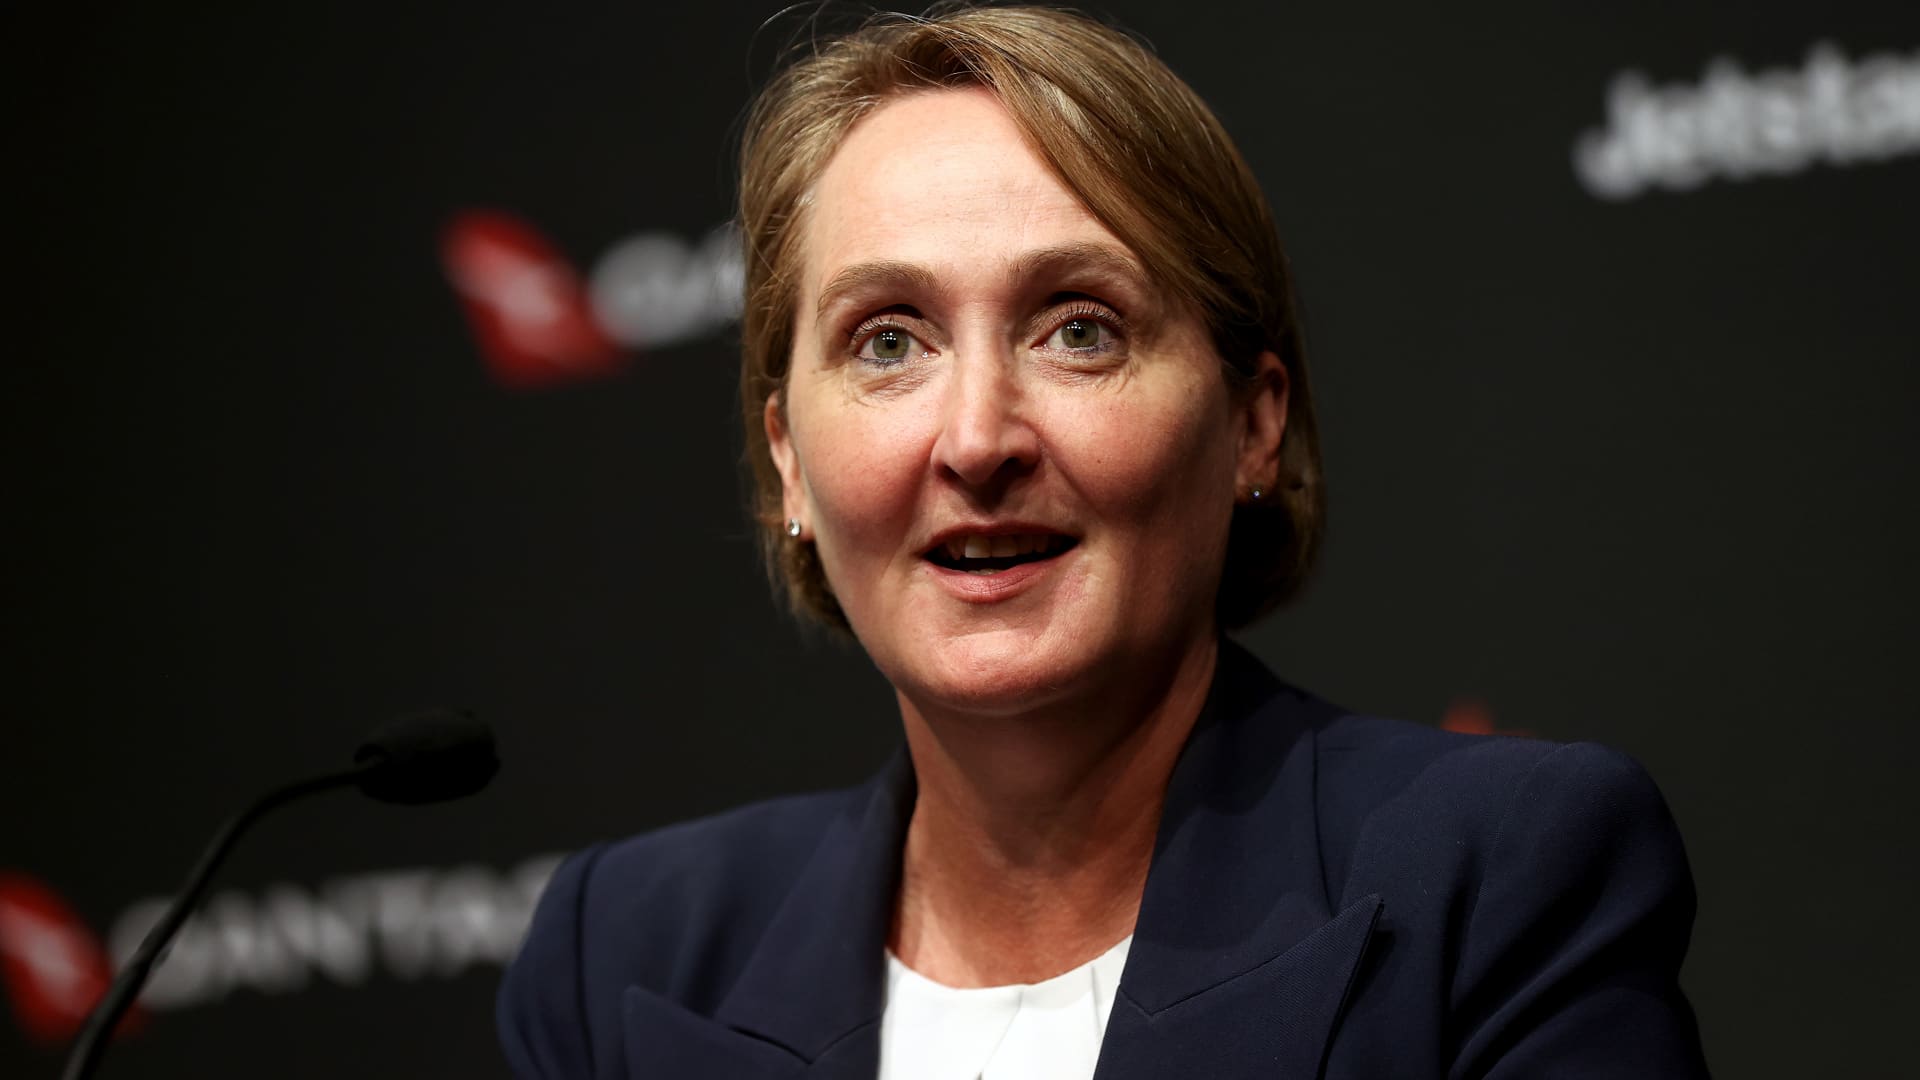 Qantas names finance chief Vanessa Hudson as next CEO, becoming first woman to lead the airline